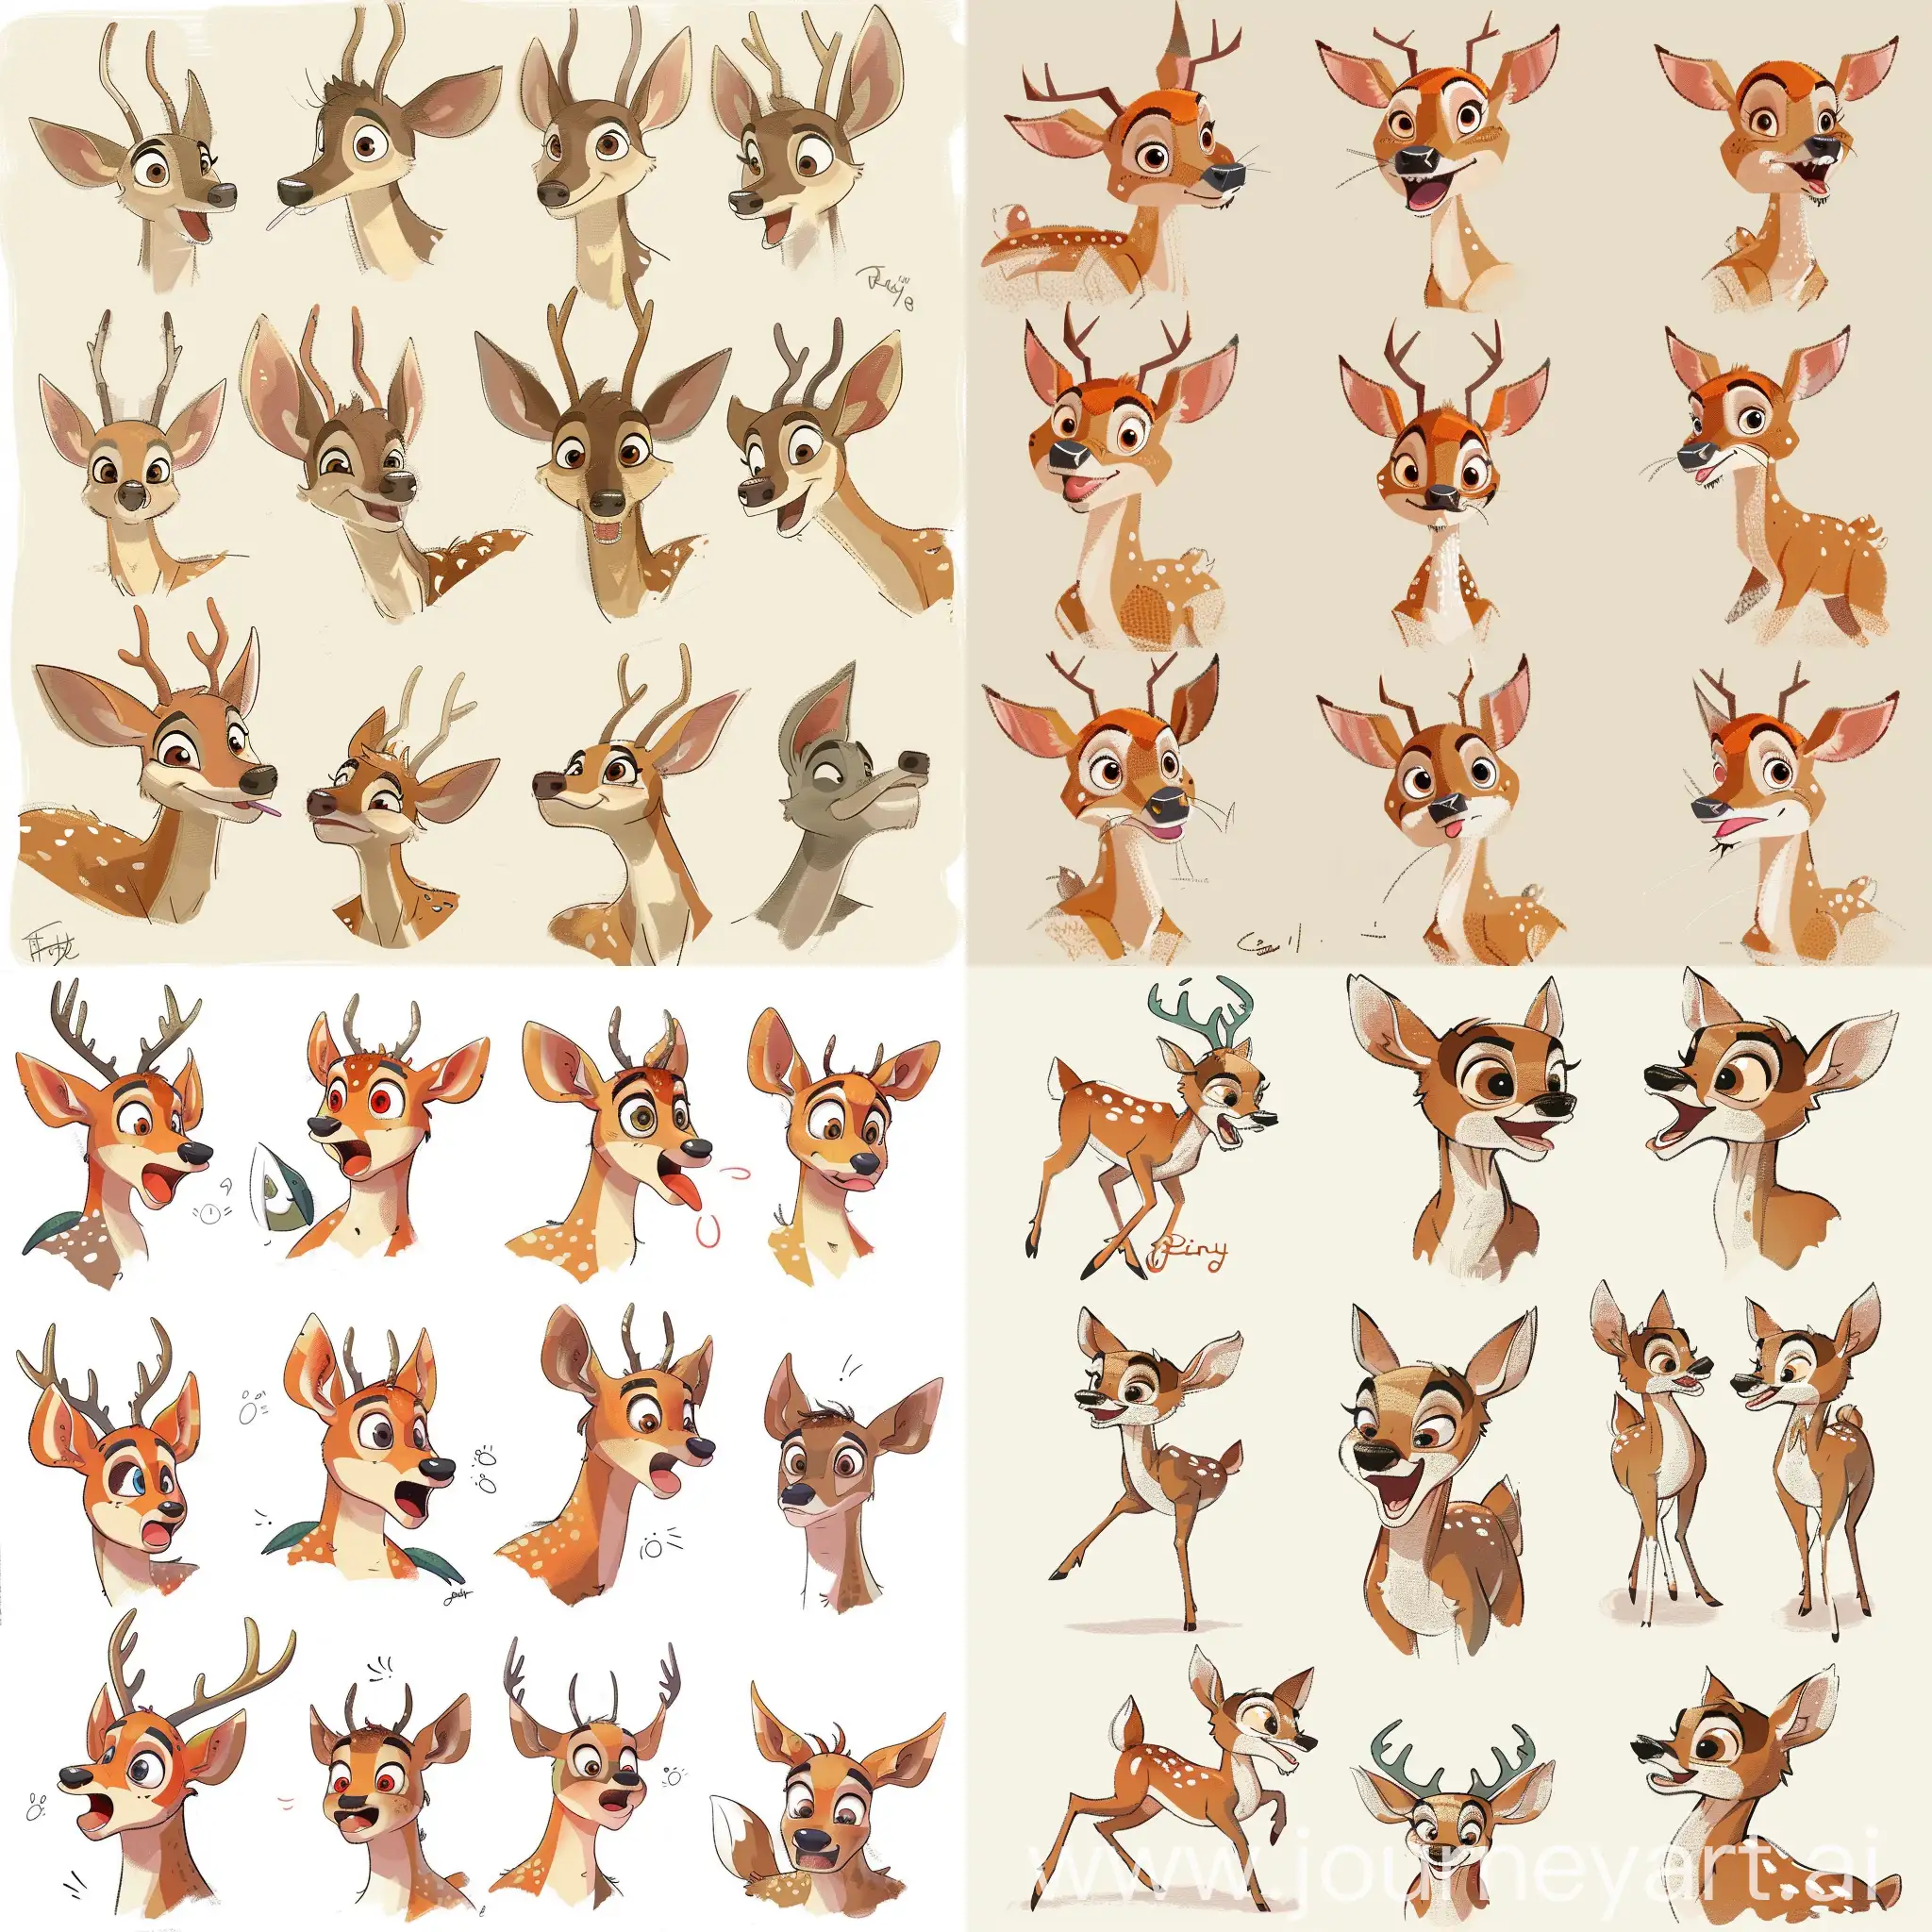 Adorable-Cartoon-Deer-Expressions-Happy-Surprised-and-Questioning